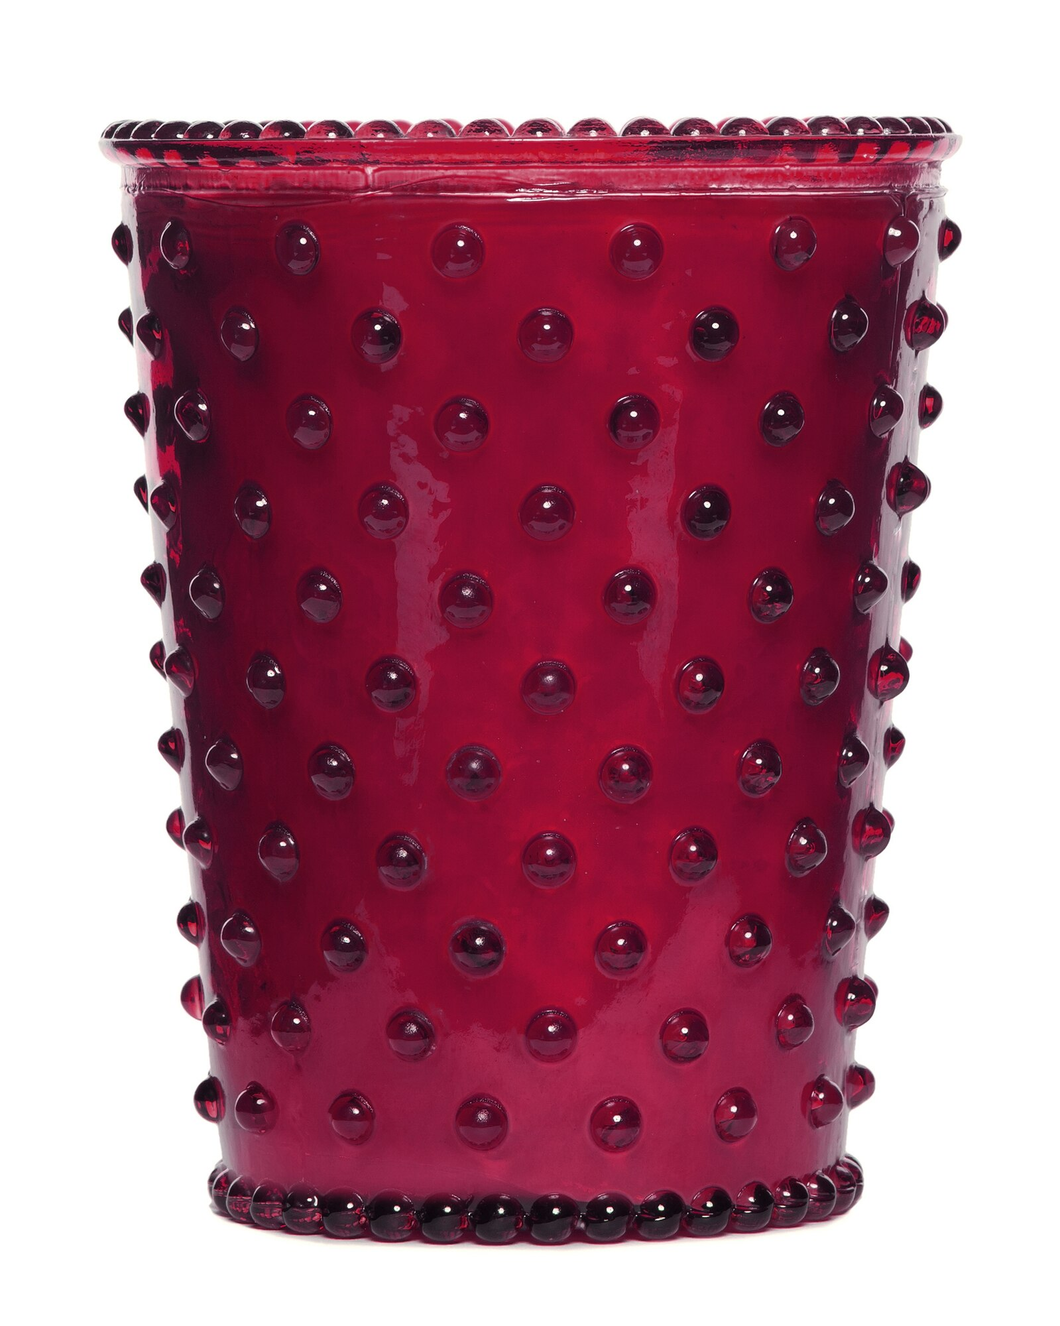 K. Hall Candle - Cranberry